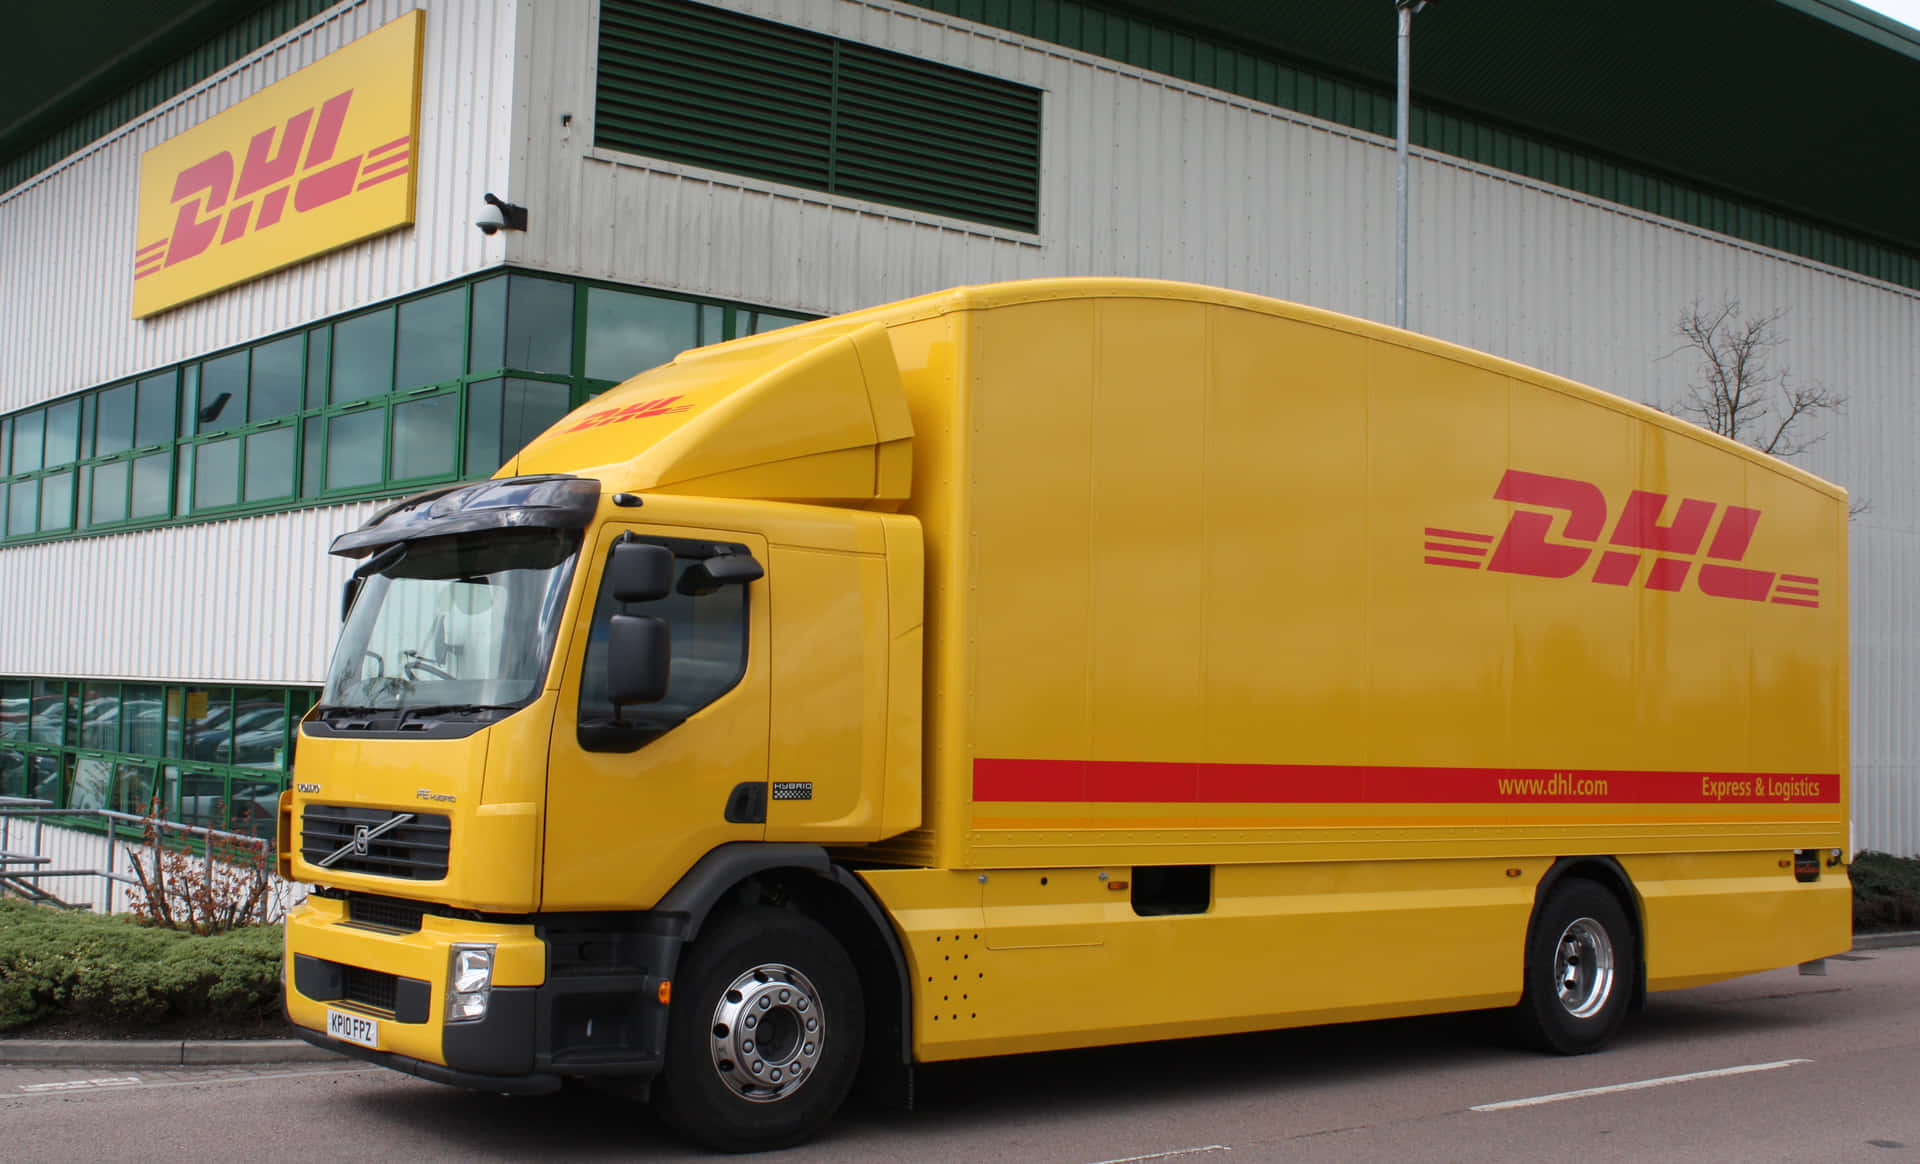 Get your items delivered fast and efficiently with DHL!